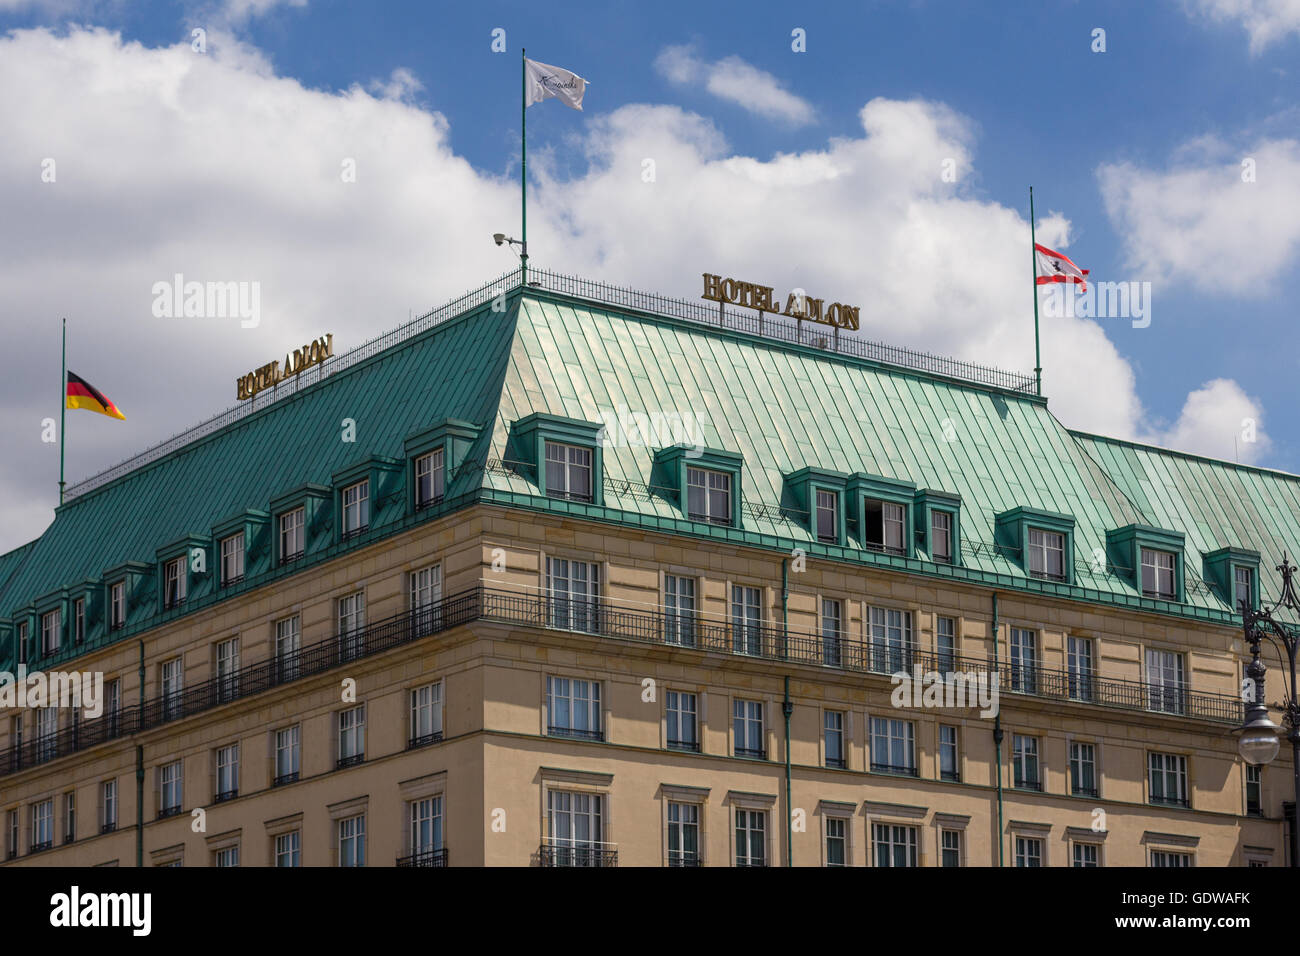 Berlin, Germany - July 20, 2016:  Hotel Adlon in Berlin. It is part of the Kempinski group and the most famous hotel in Berlin. Stock Photo